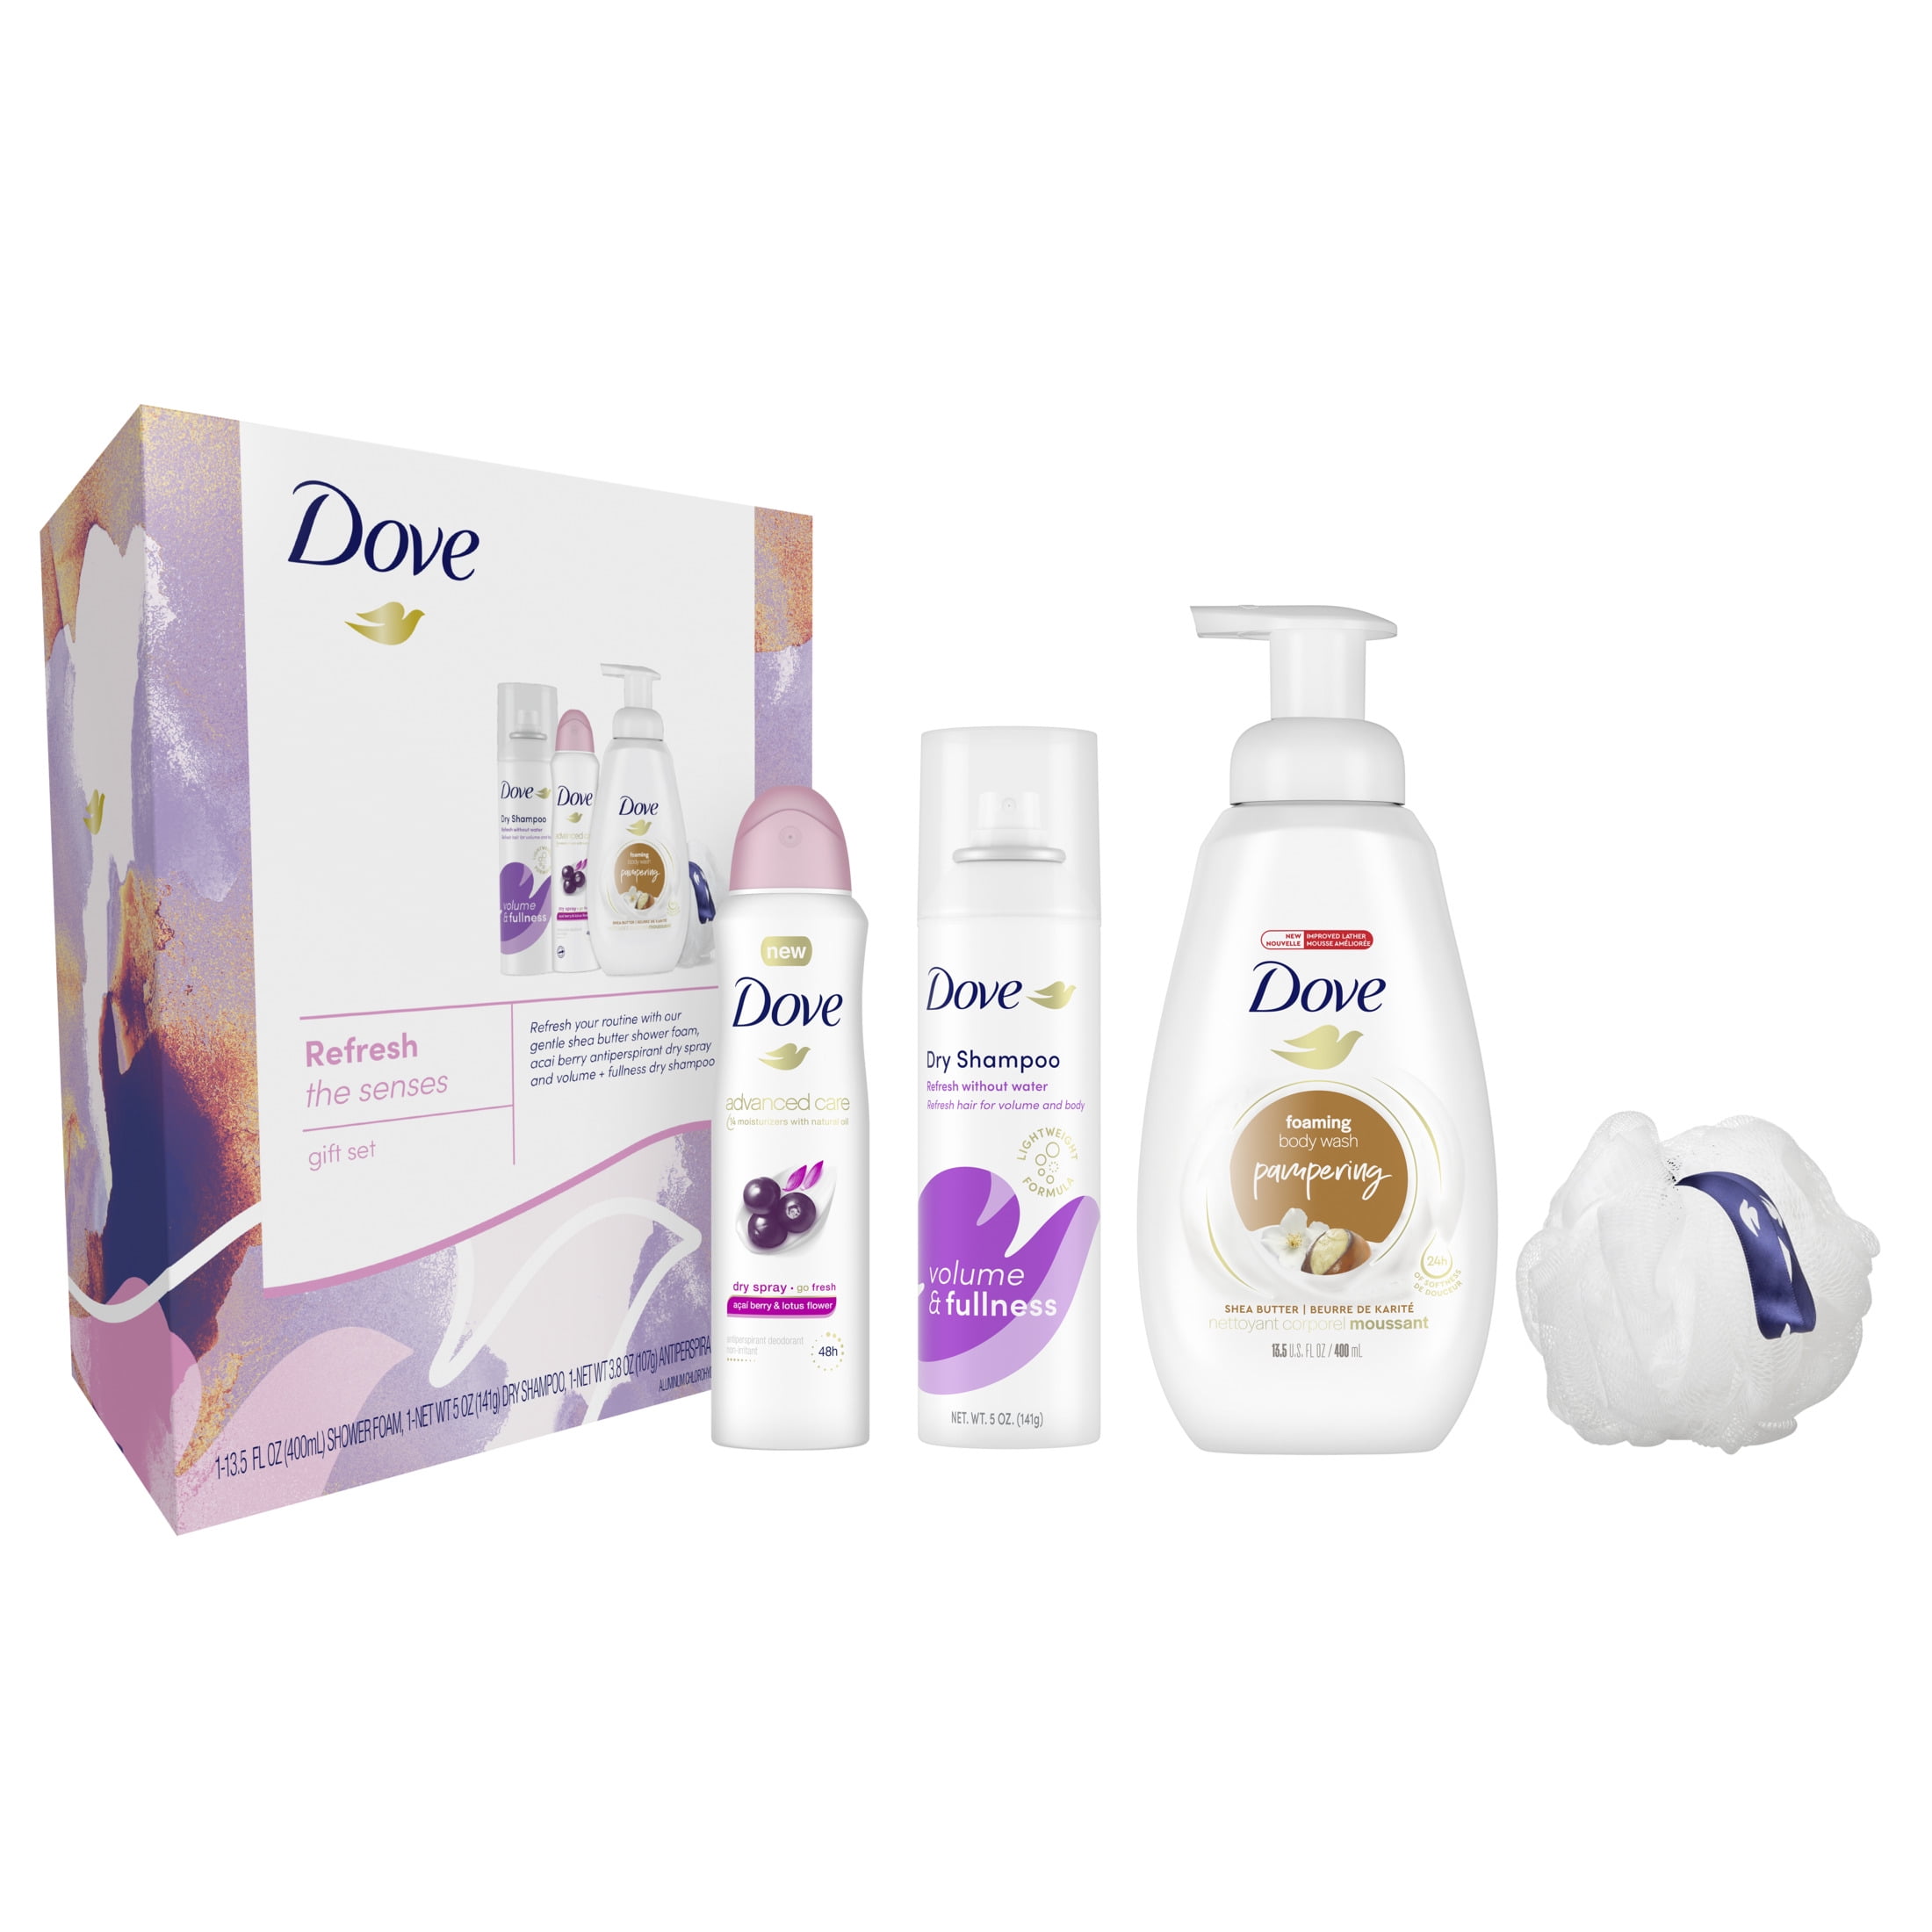 20 VALUE) Dove Walmart Exclusive Refresh The Senses Bath and Body Gift Set,  4 Count 